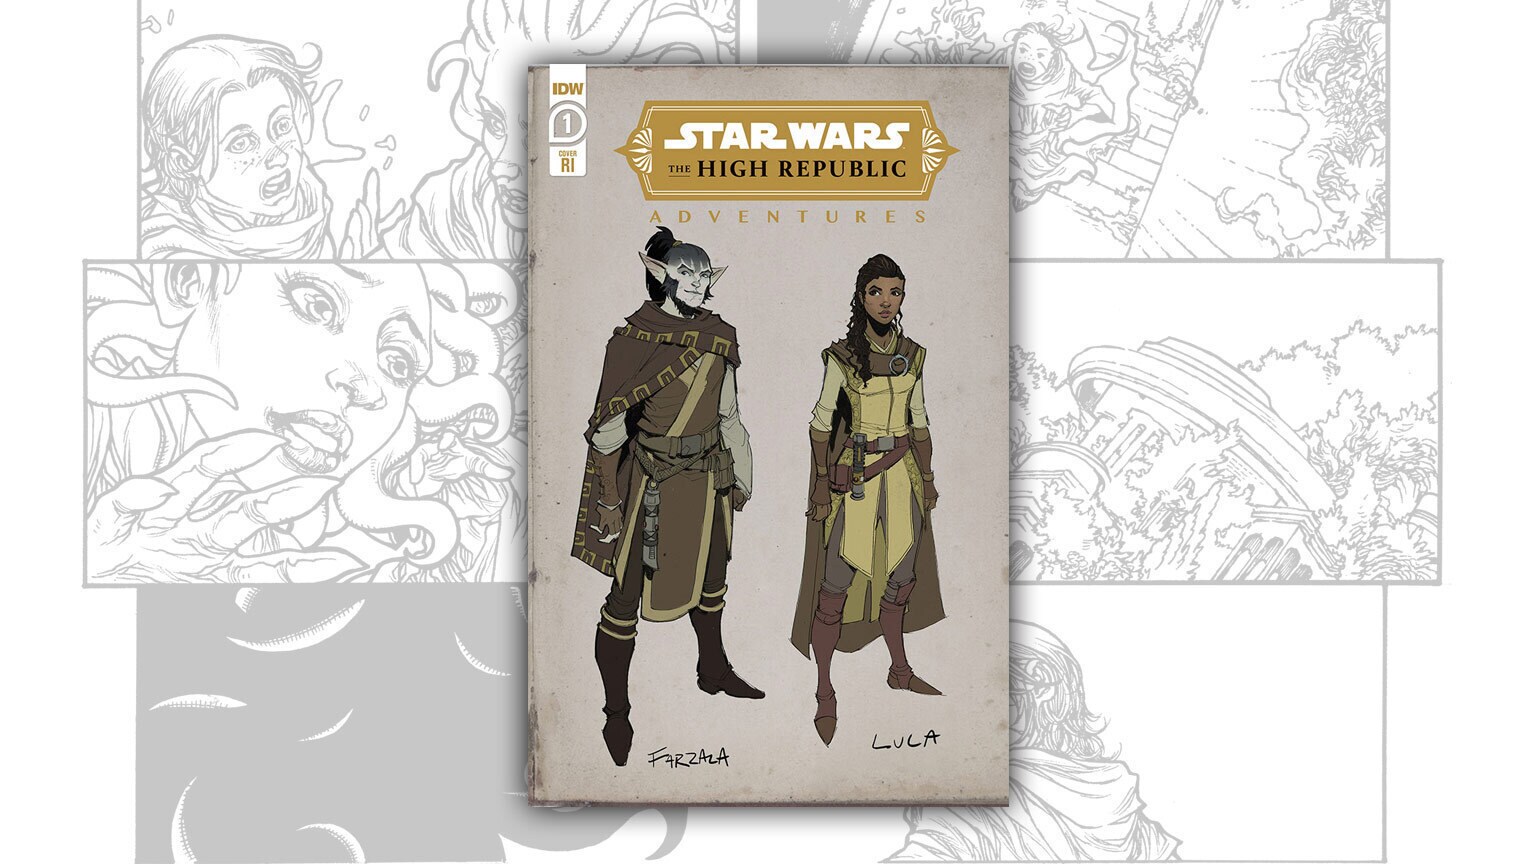 Yoda Returns with Another Lesson in IDW's Star Wars: The High Republic Adventures